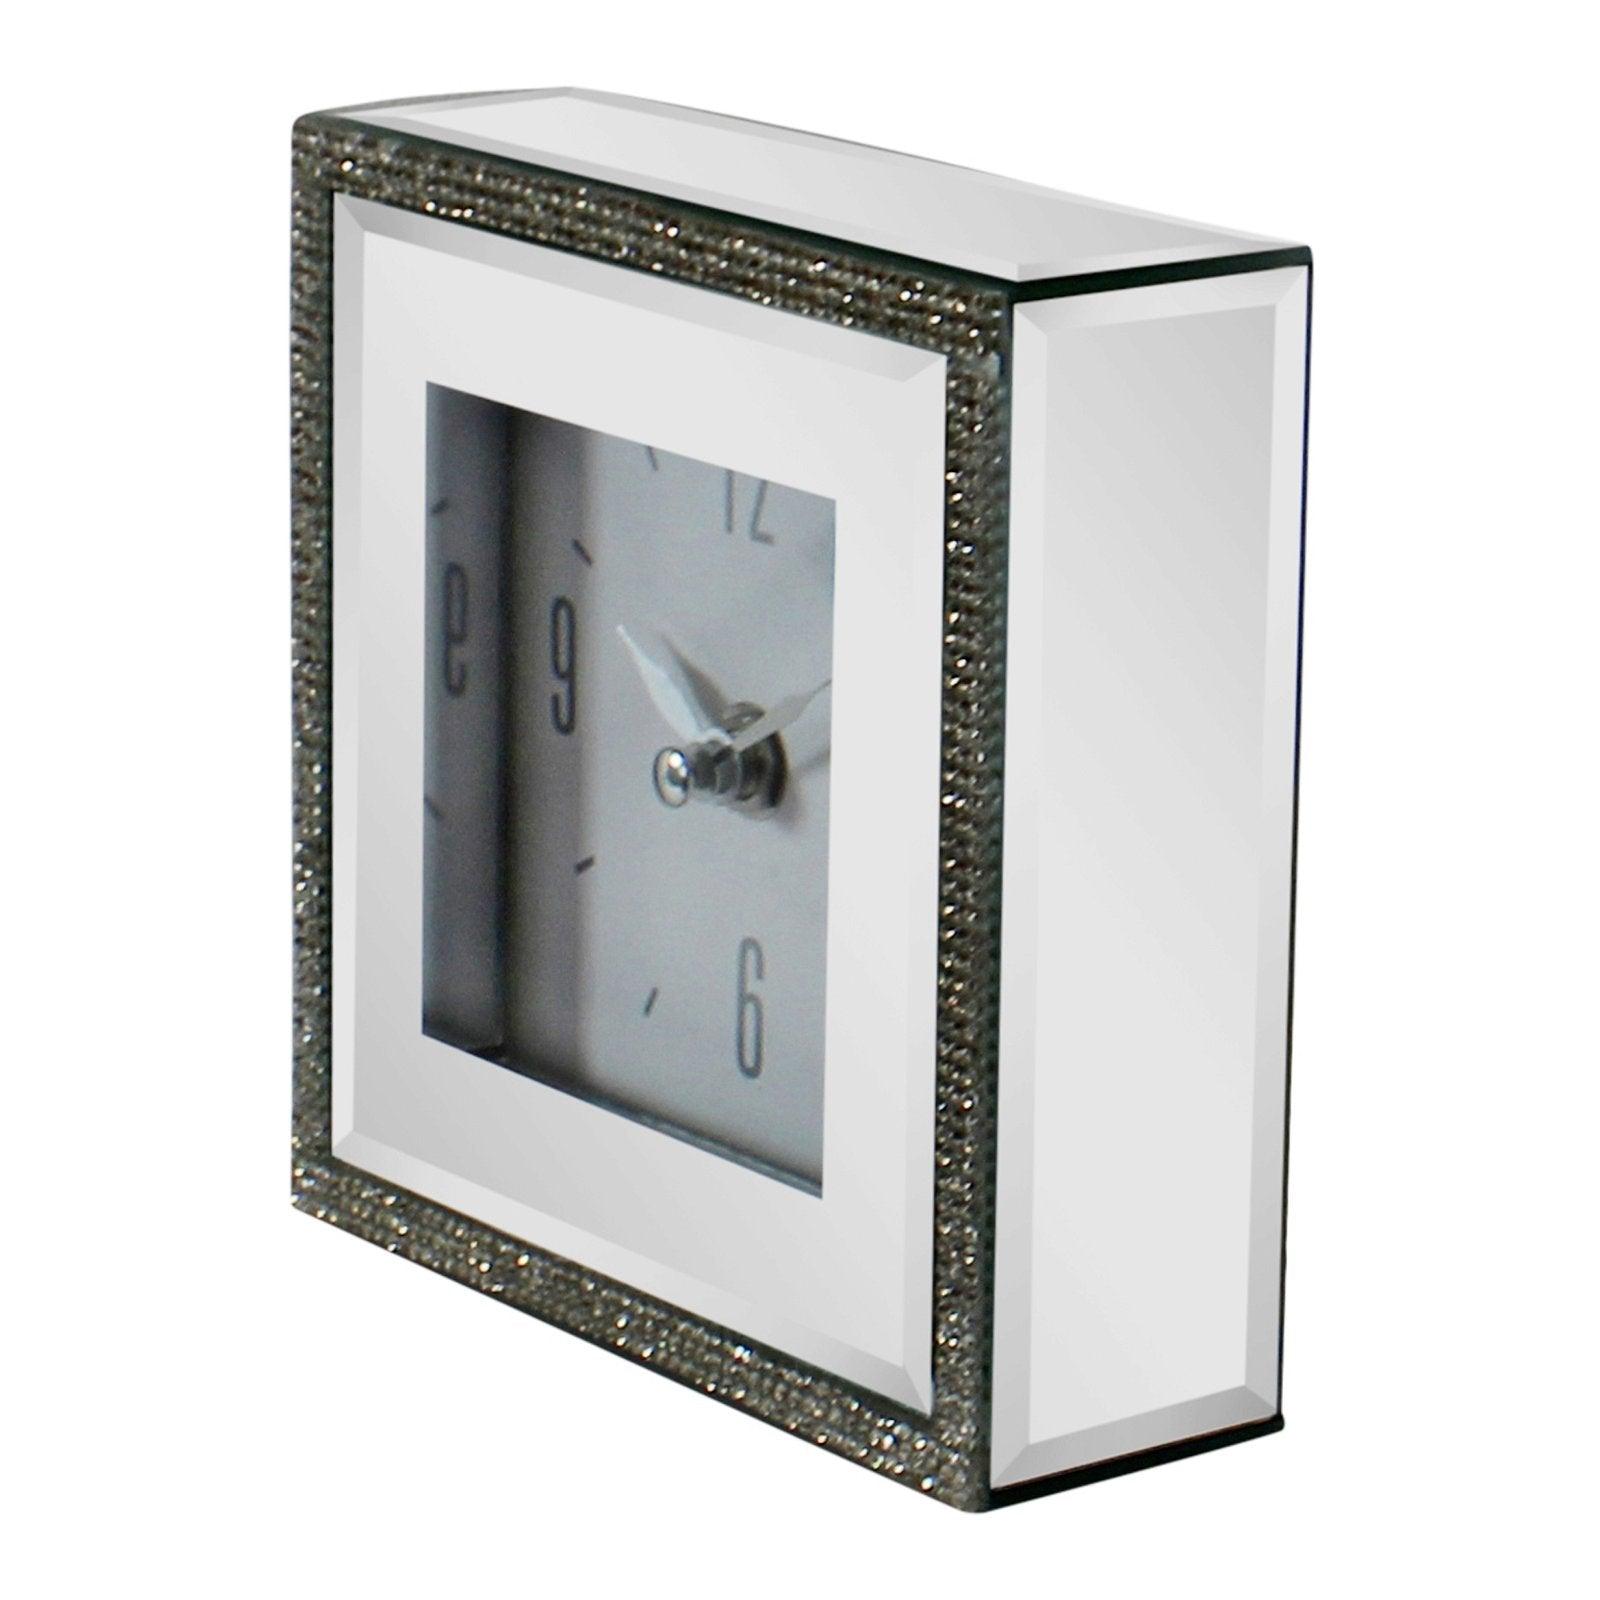 View Small Freestanding Mirrored and Jewelled Table Clock information